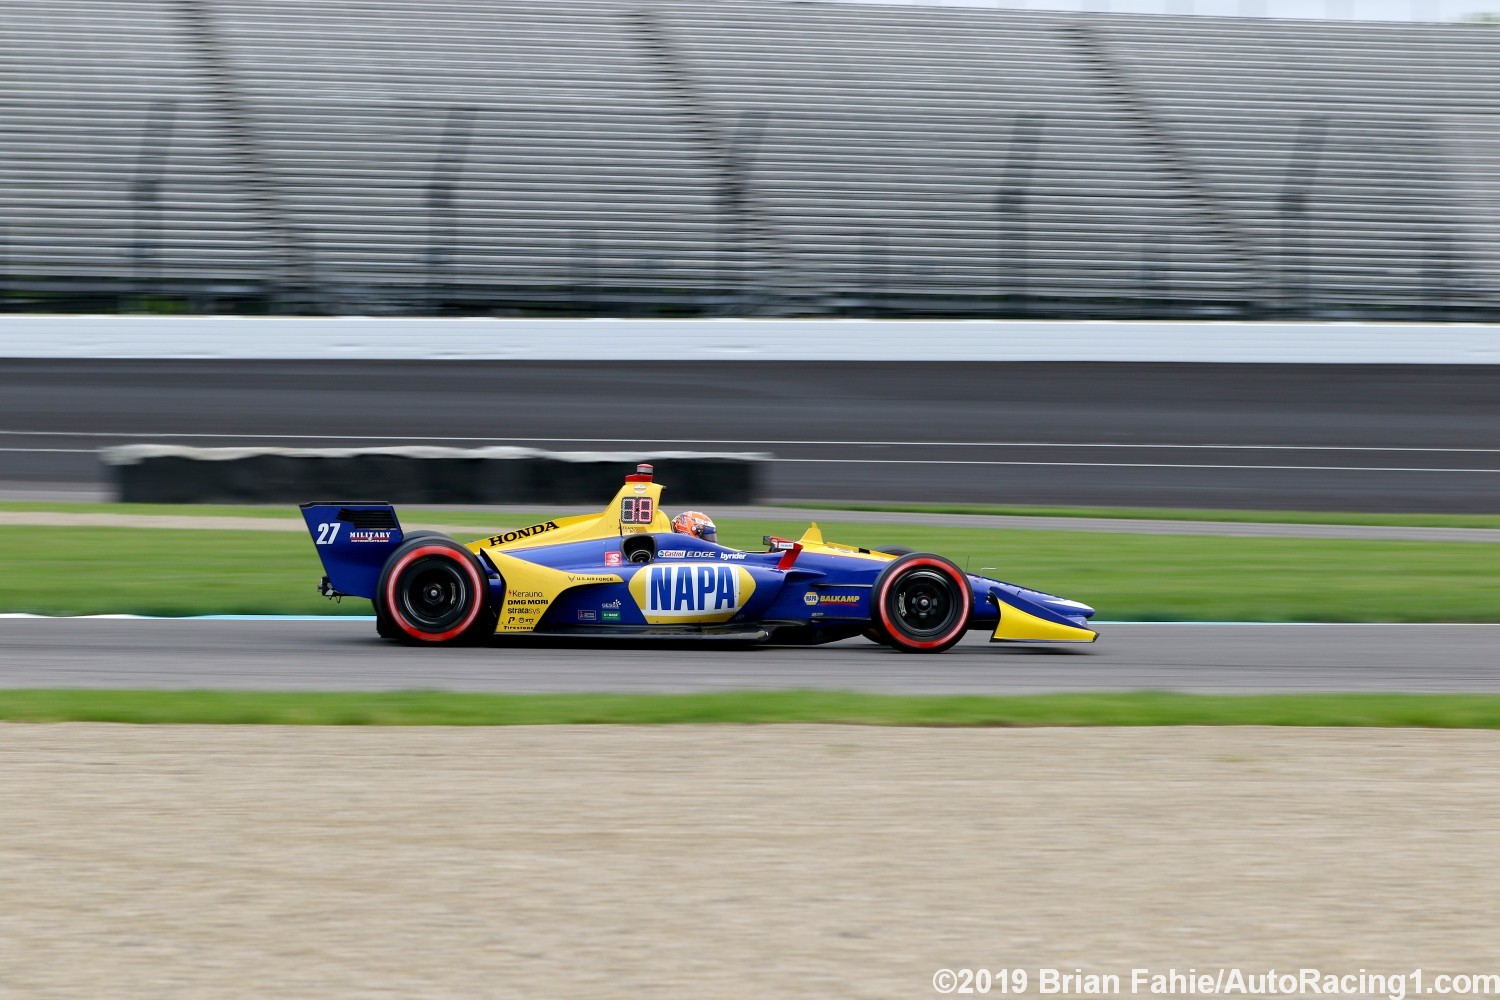 Rossi out to lunch on the Indy road course